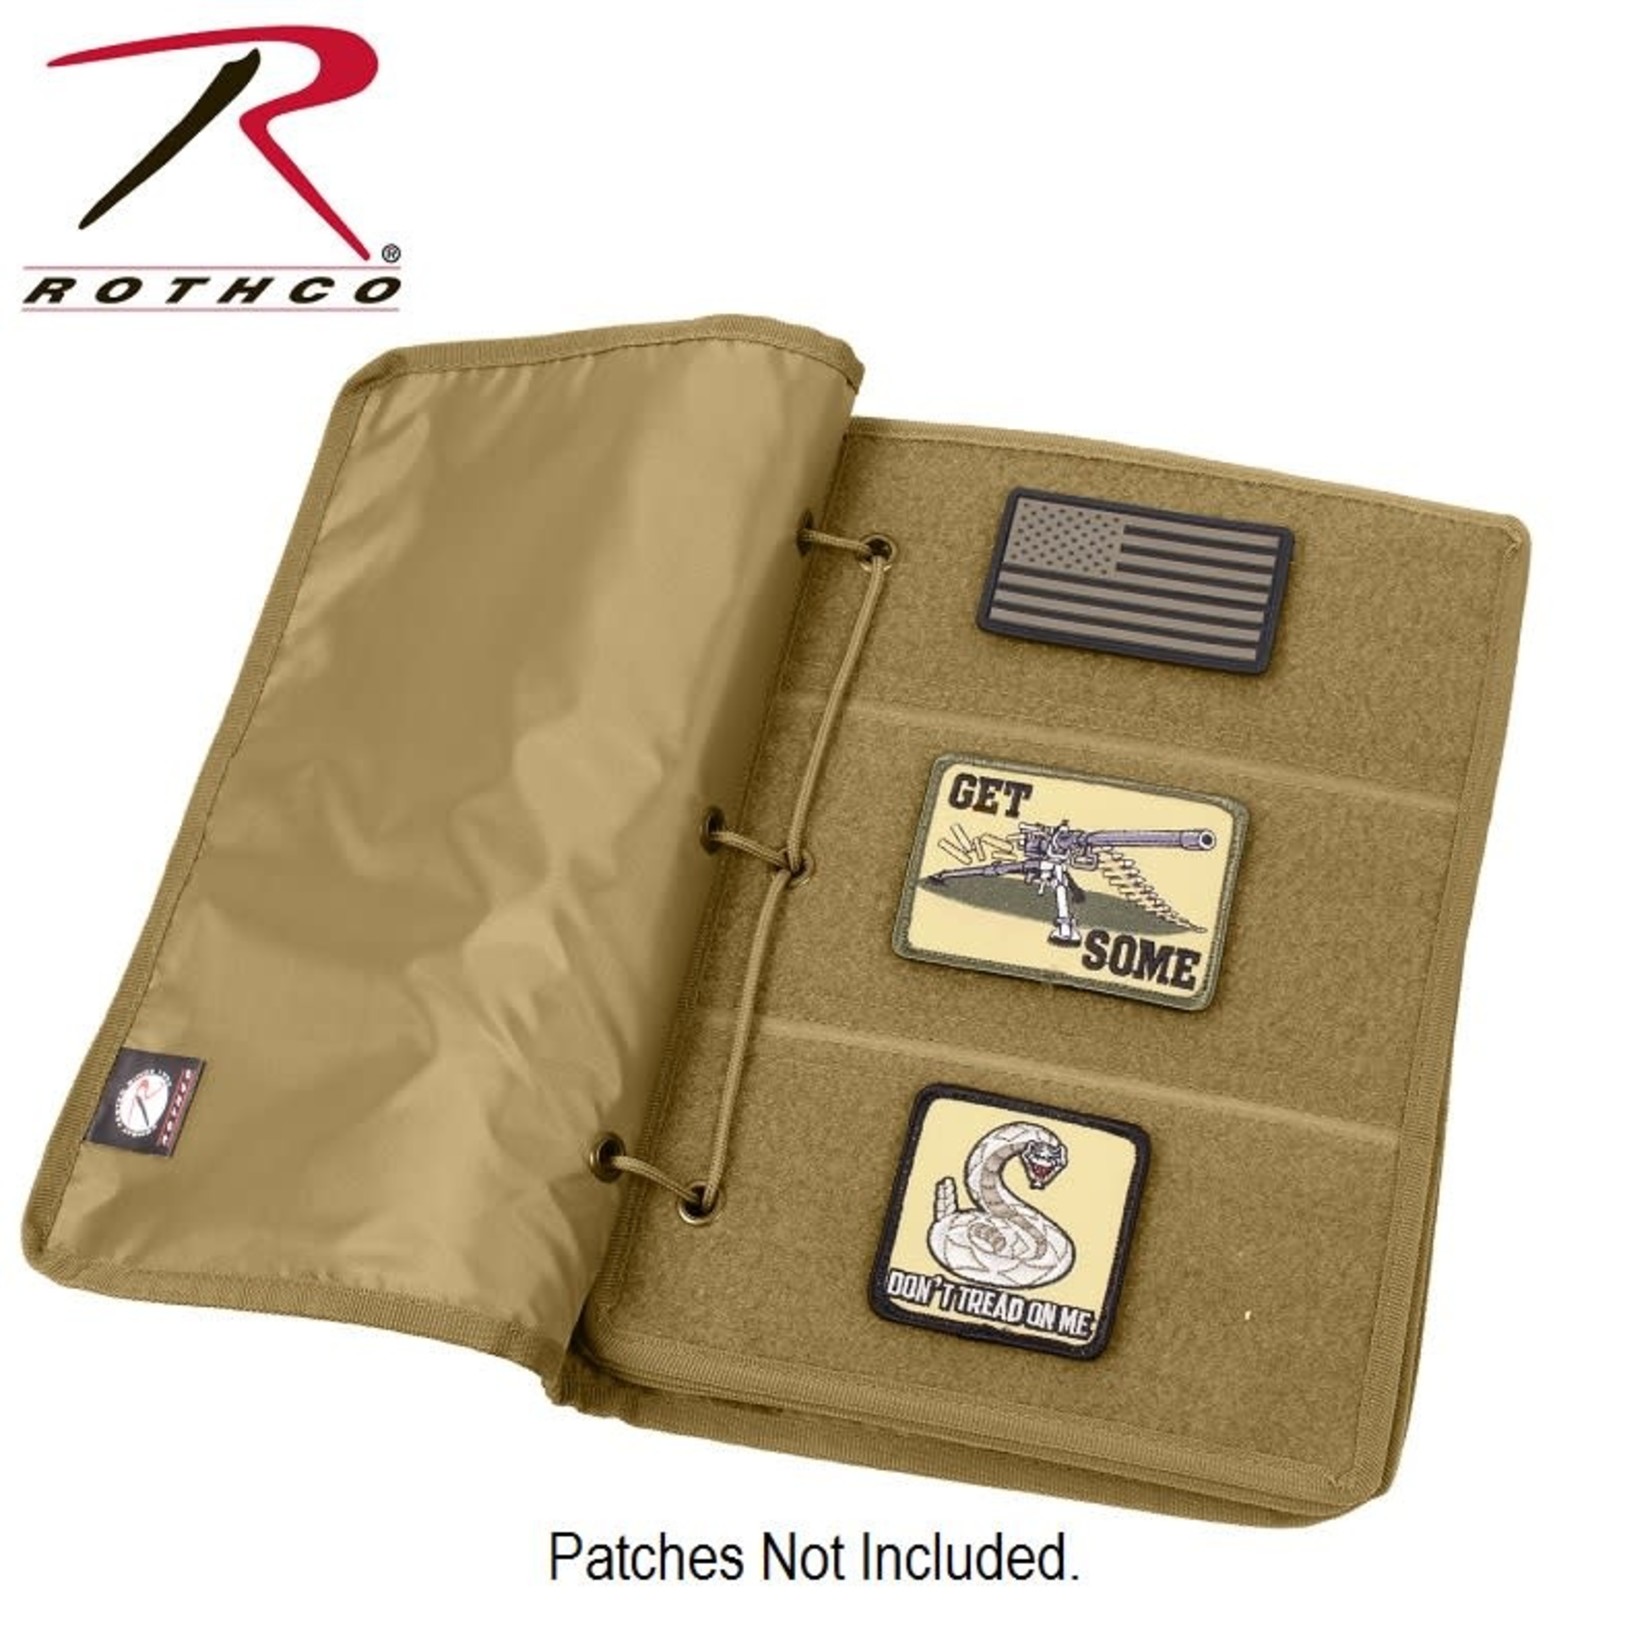 Rothco Rothco Hook & Loop Patch Book